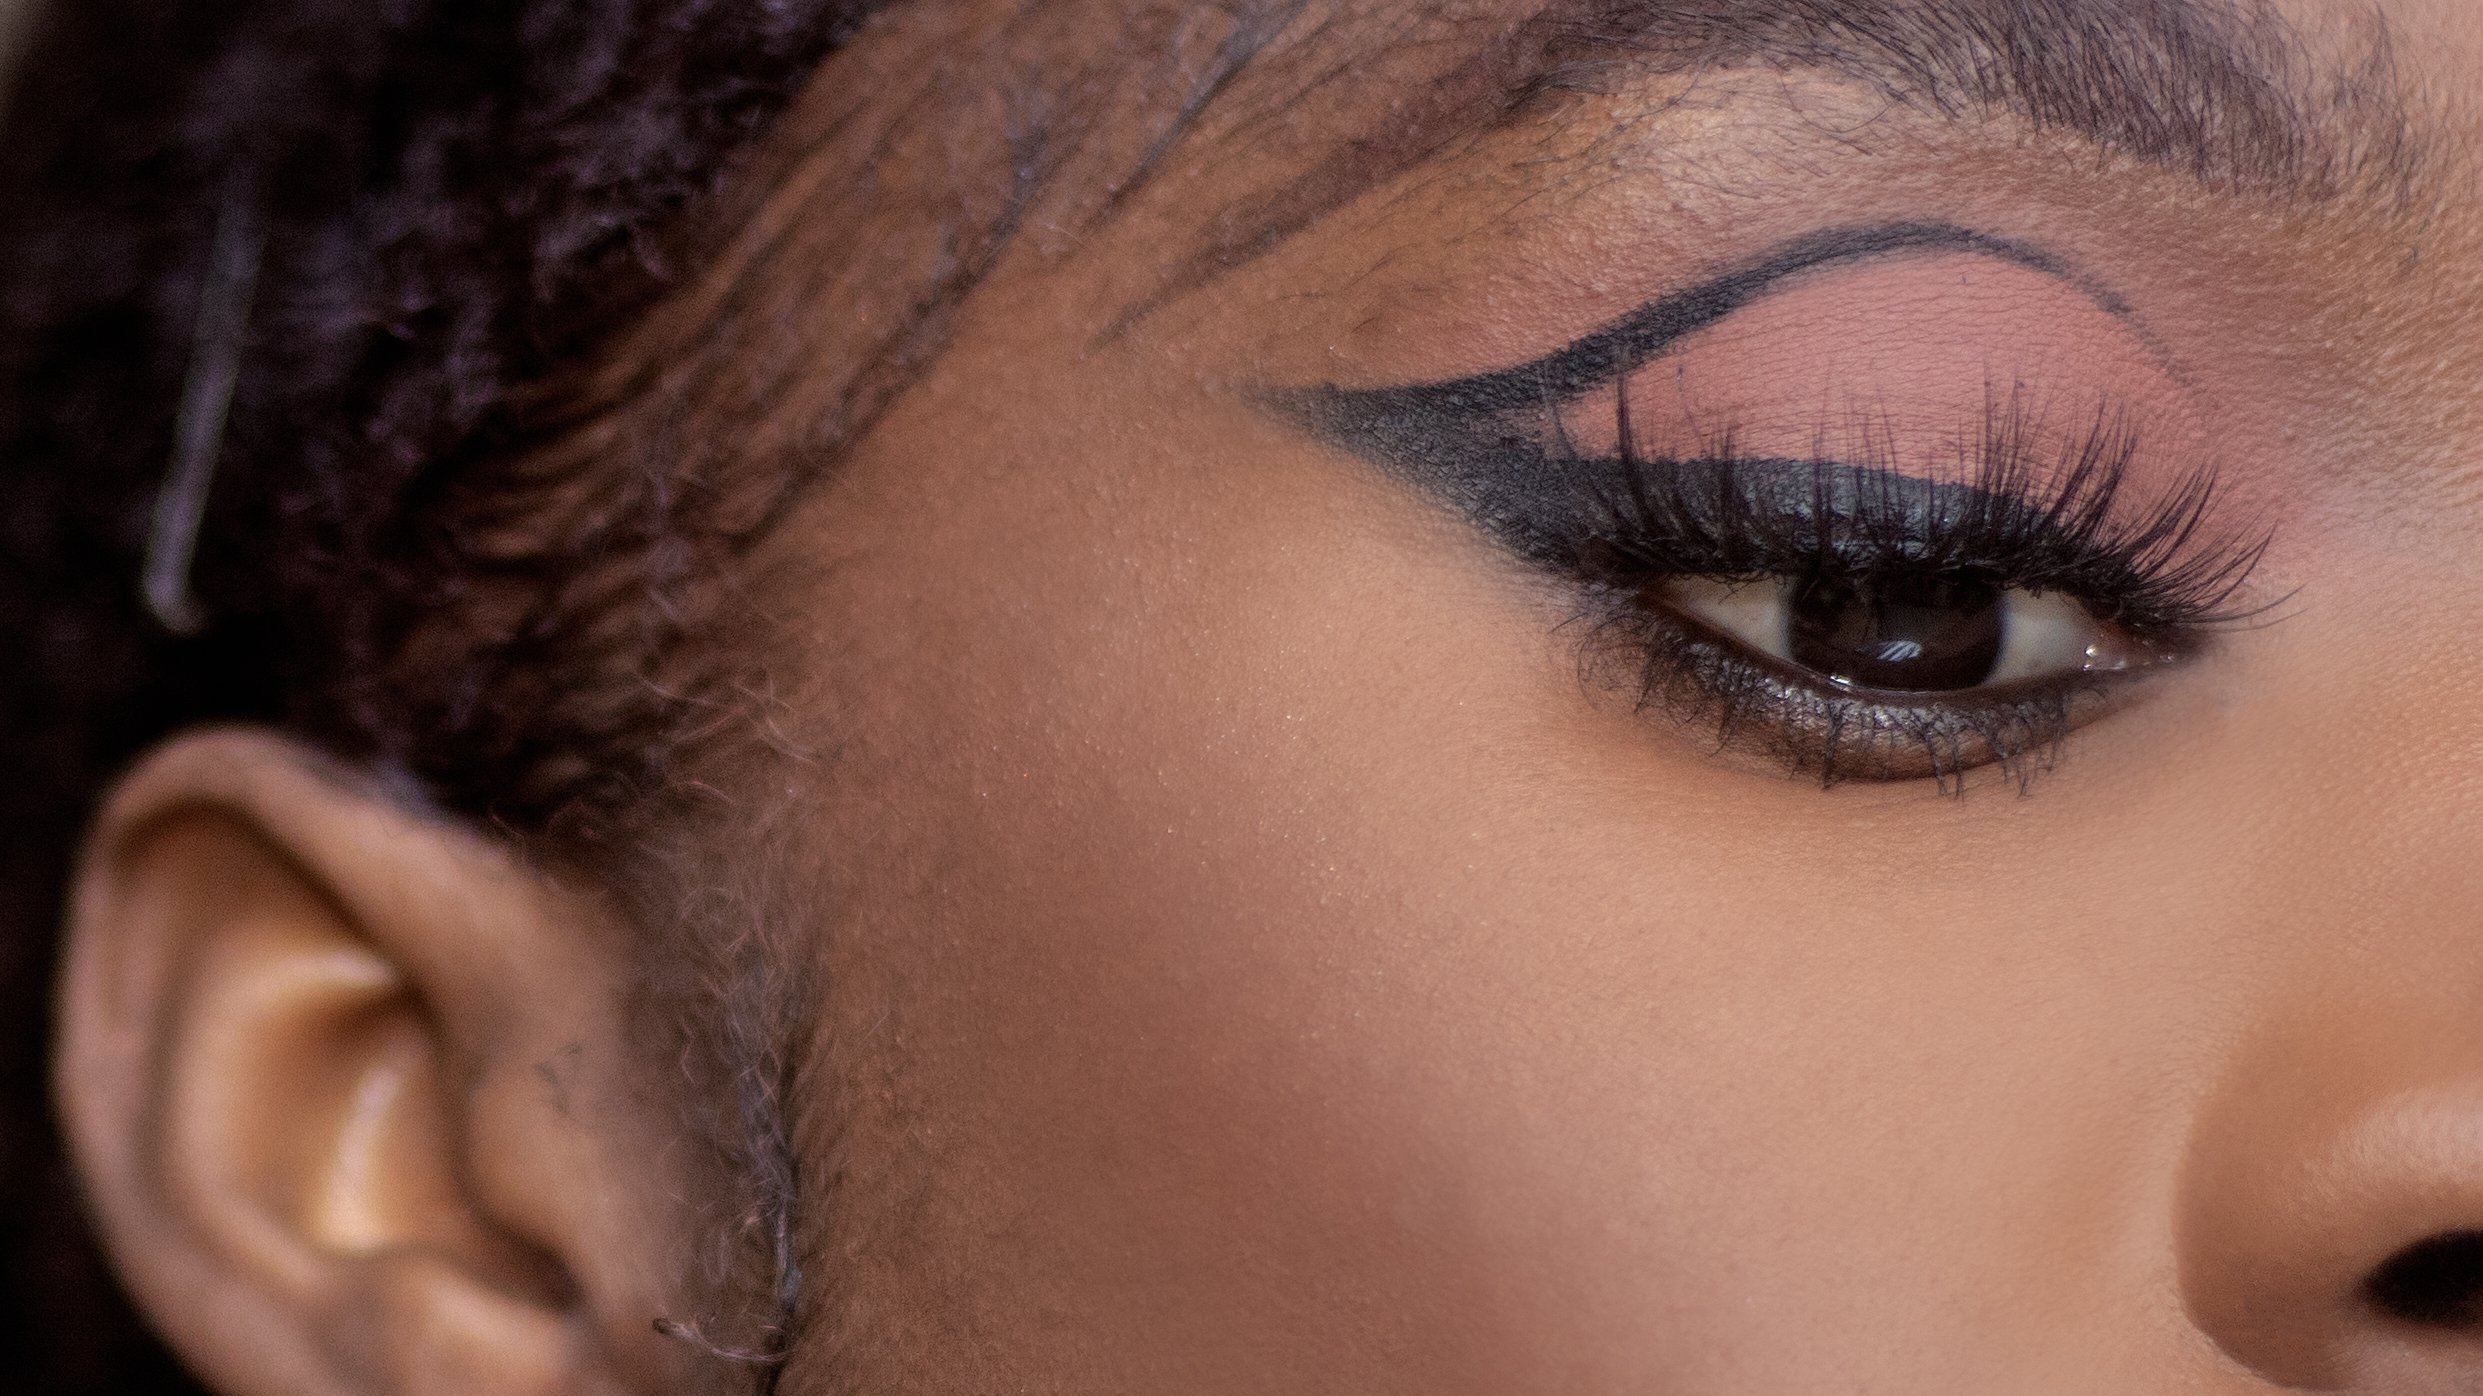 How to: Simple Graphic Eyeliner & Re-sparking a Love for Makeup